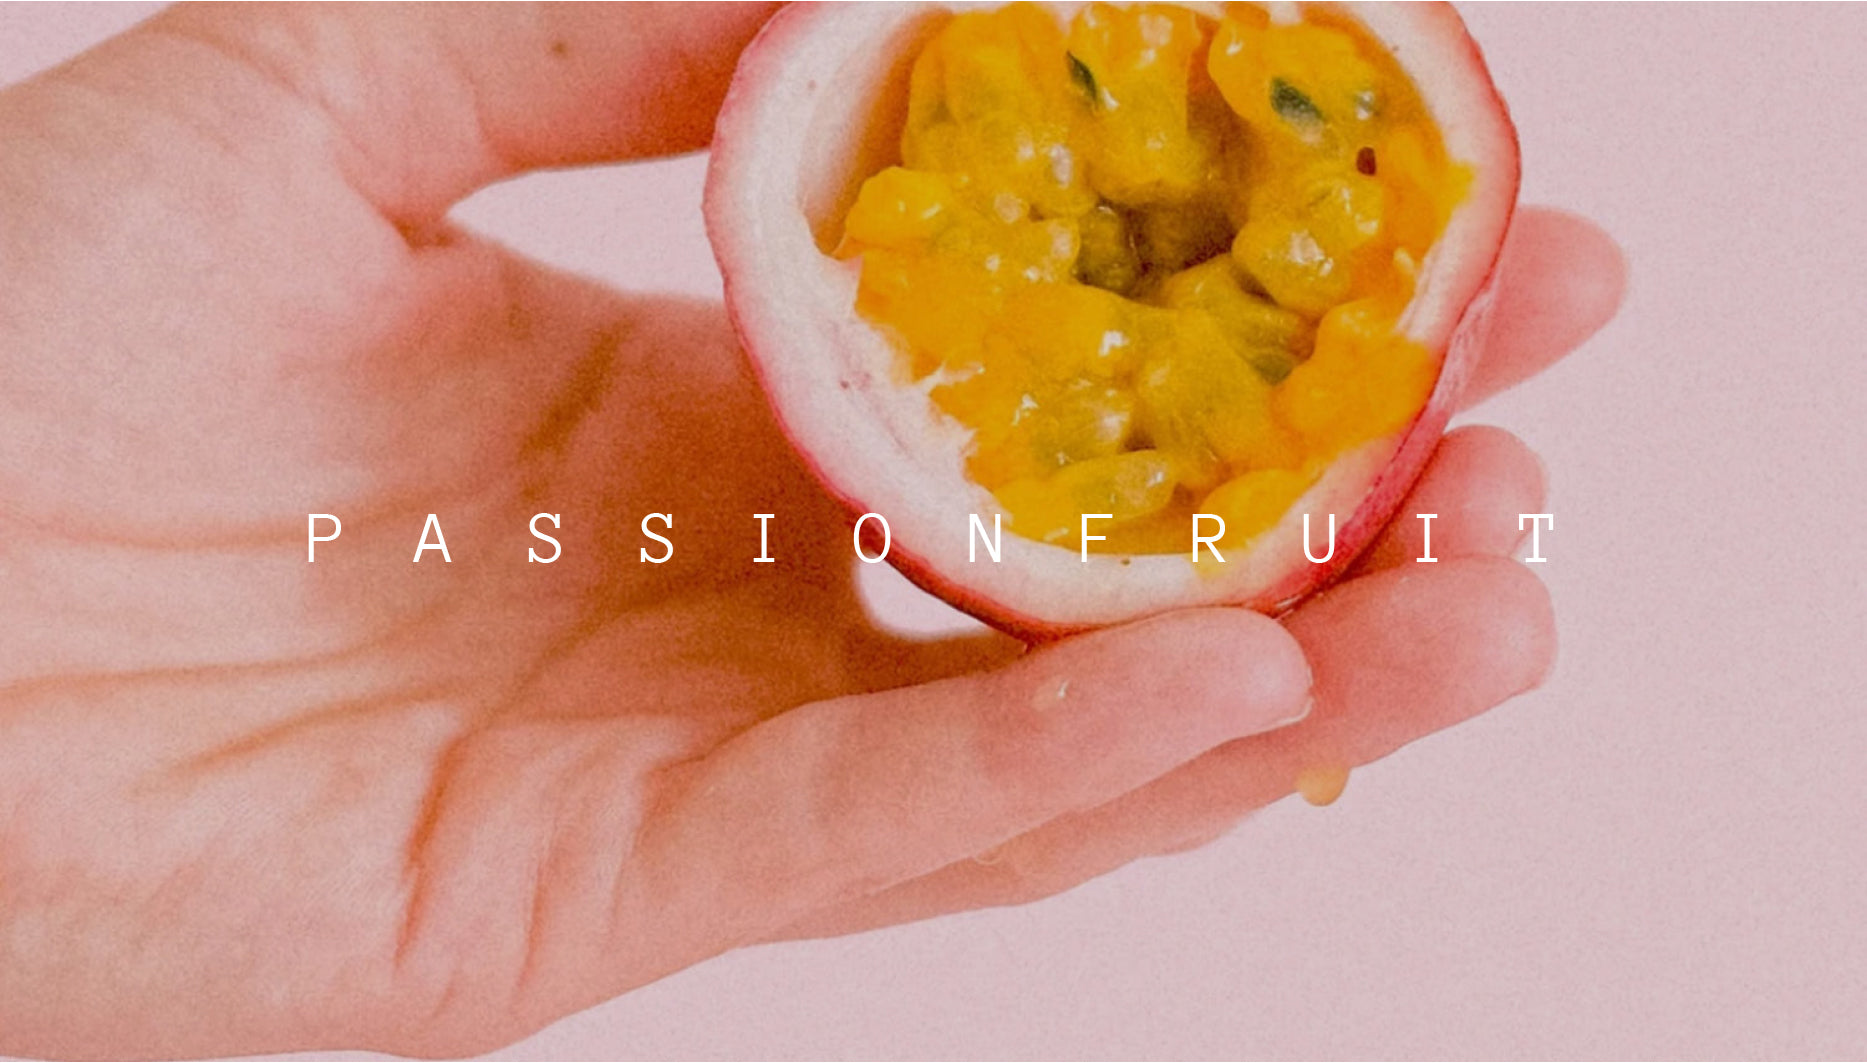 This month we are celebrating the passion behind passionfruit